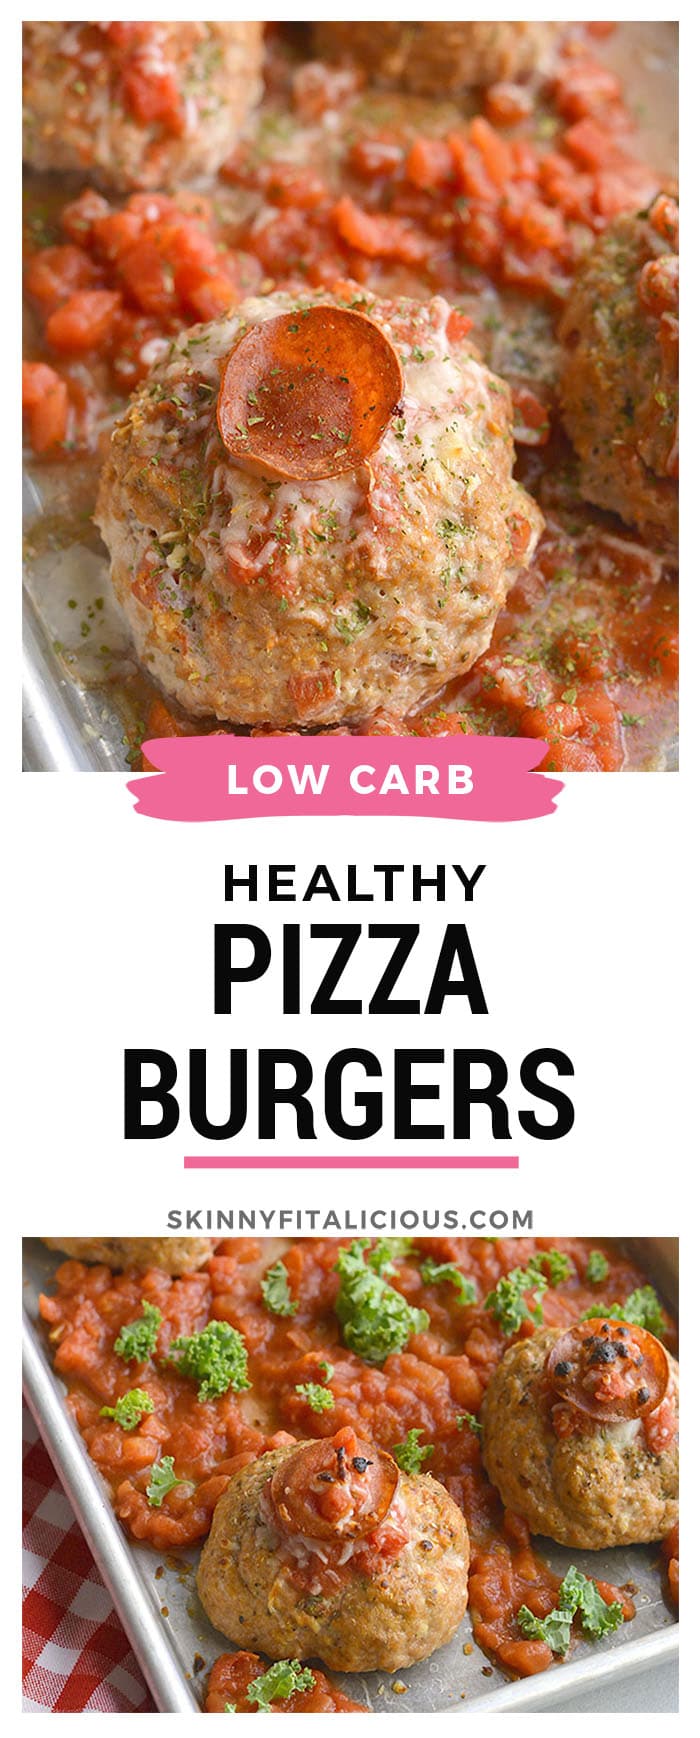 Healthy Pizza Turkey Burgers! Flavorful, protein-packed burgers bursting with delicious flavors! Made with wholesome ingredients and delicious seasonings and baked on sheet pan for a no fuss, easy meal. Gluten Free + Low Calorie + Low Carb